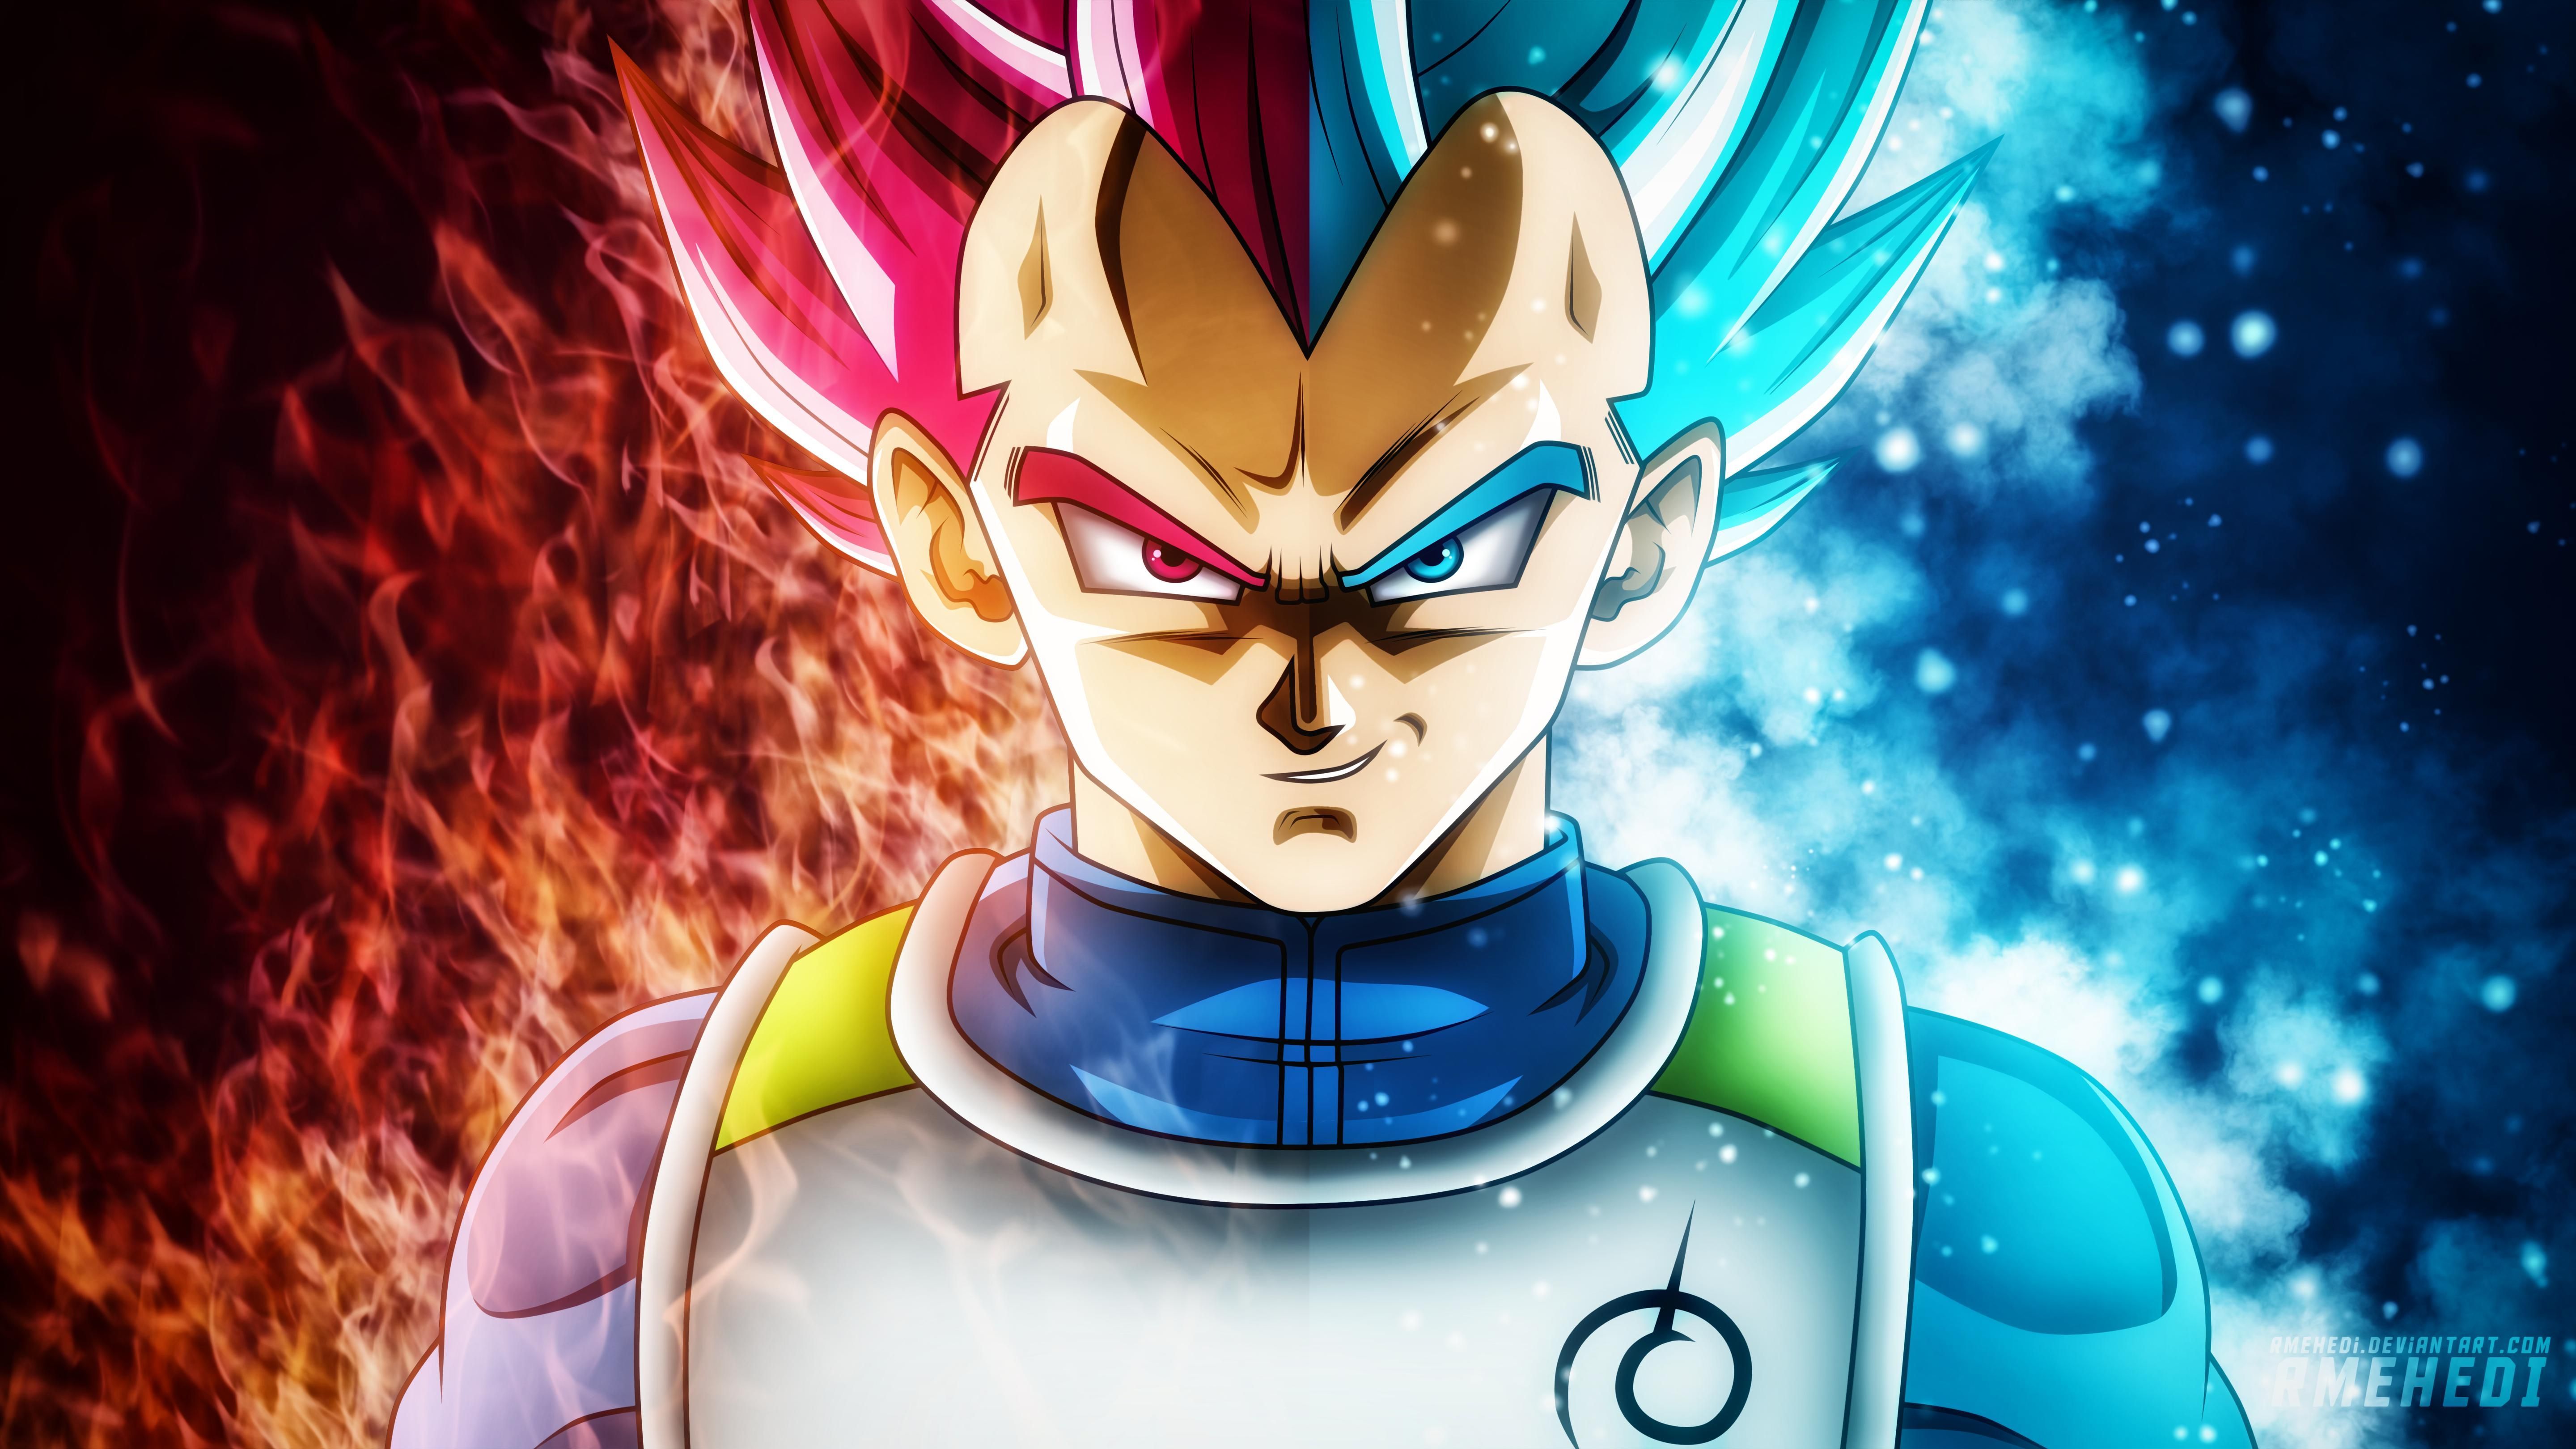 Dragon Ball Super Wallpapers High Definition On Wallpaper 1080p HD